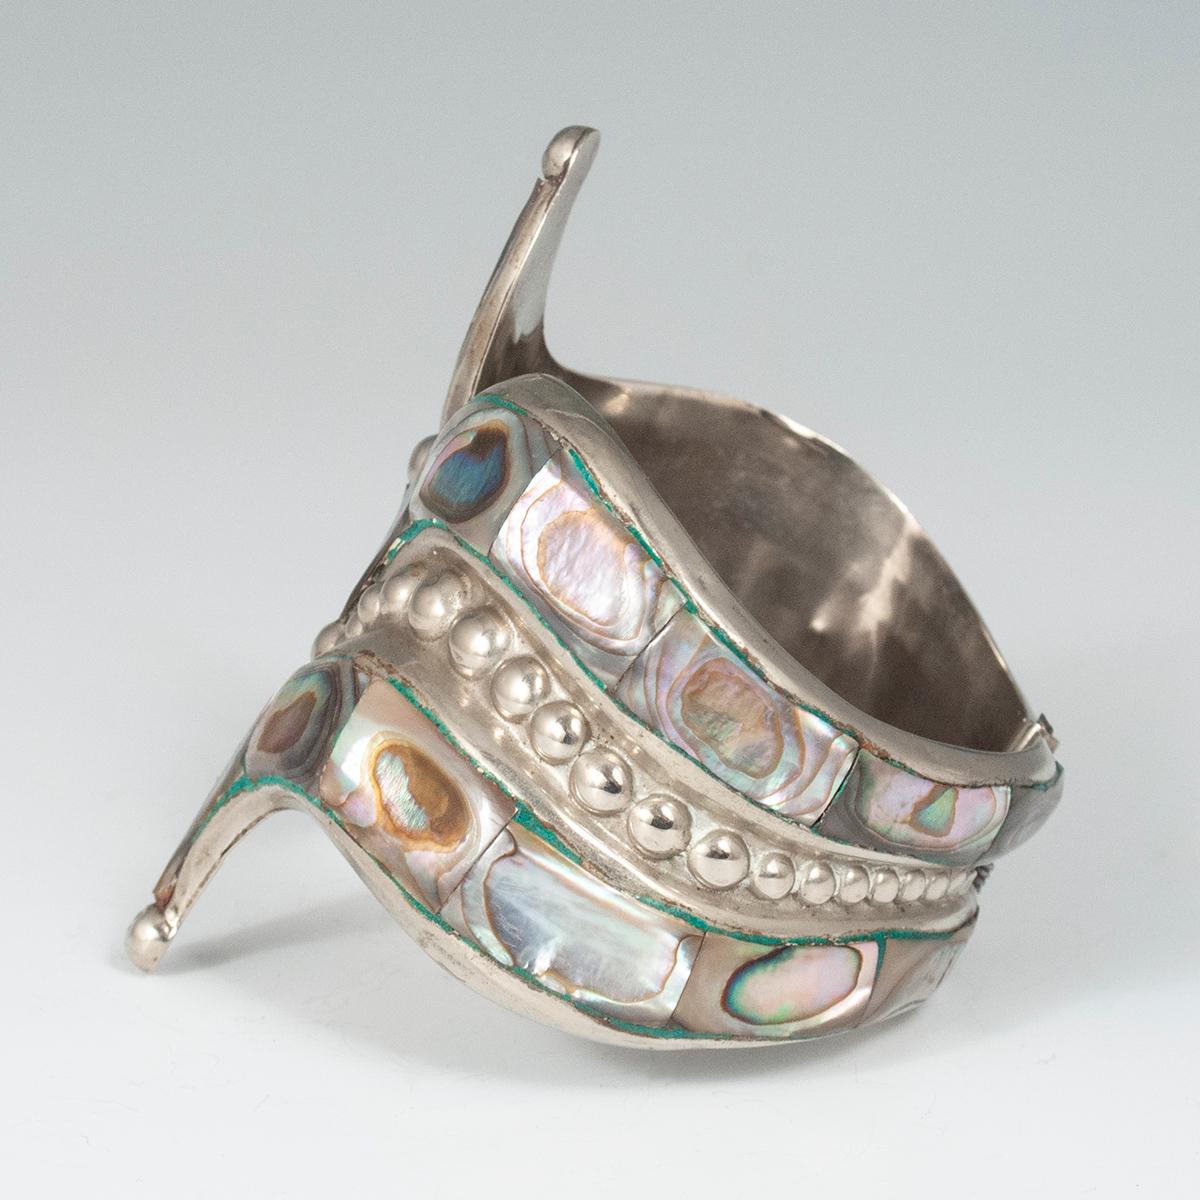 Hand-Crafted 1980s Abalone and Silver Clamper Bracelet, Taxco, Mexico